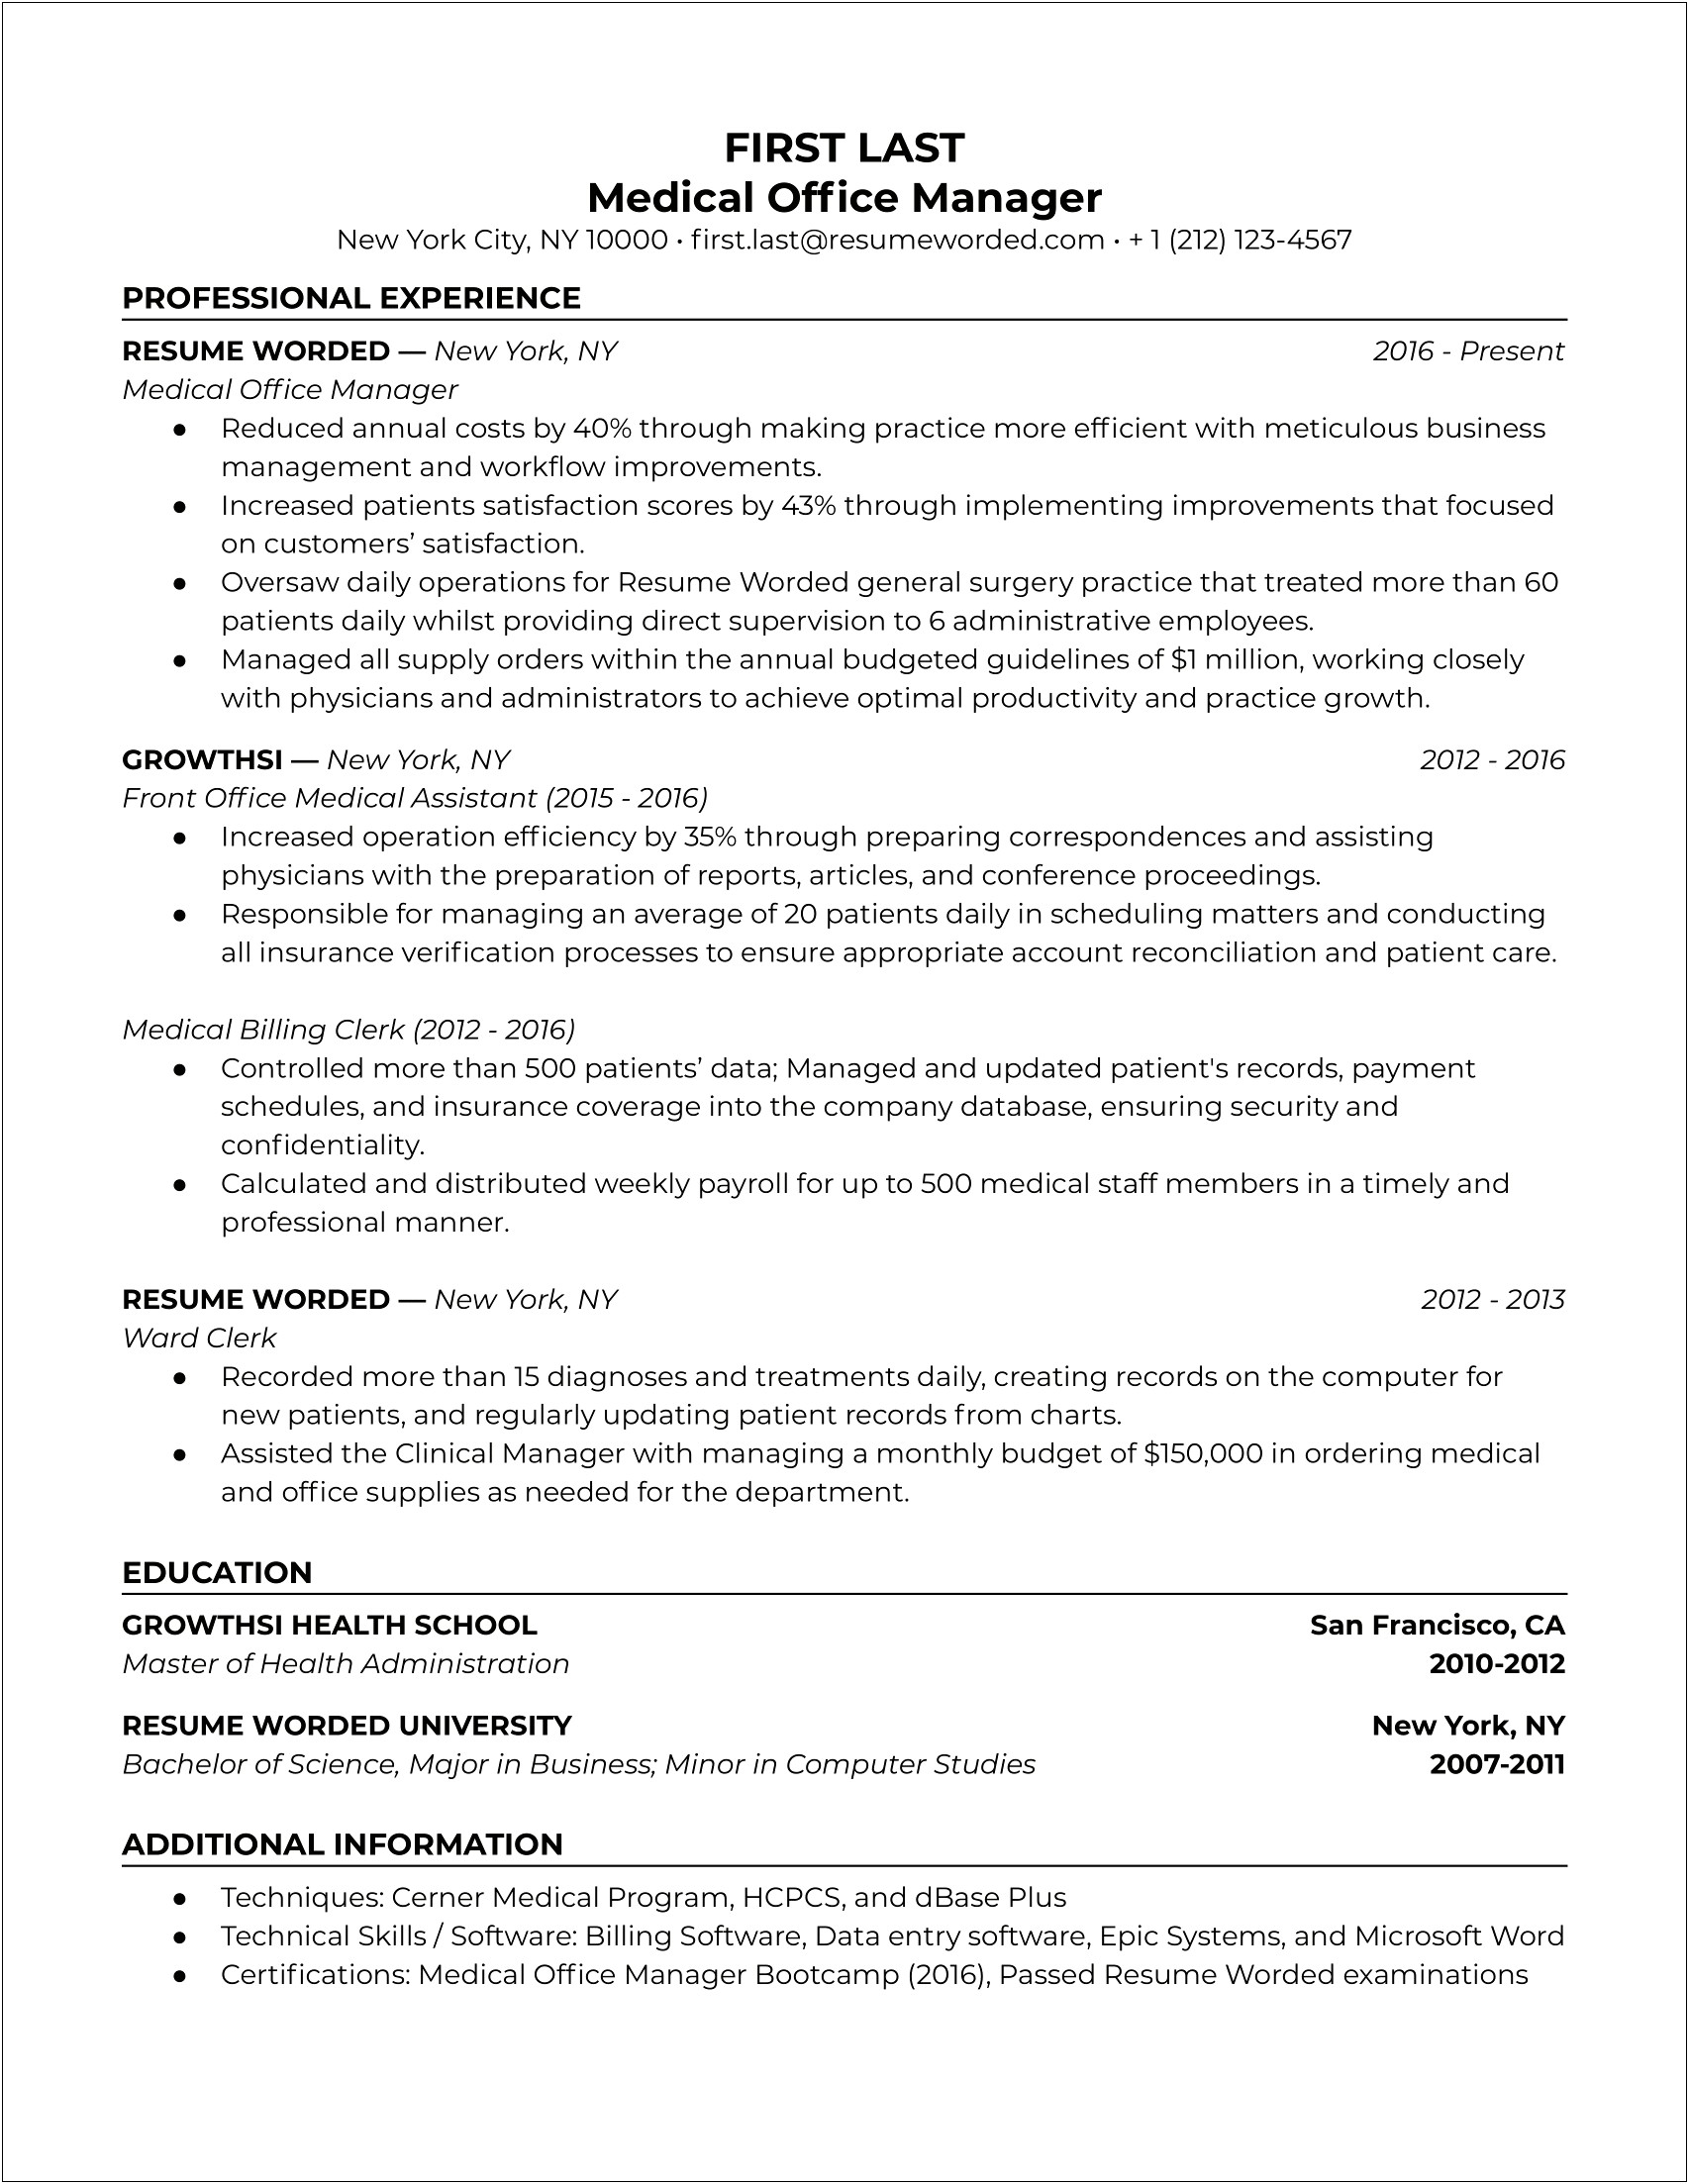 Sample Resume Office Manager Construction Company